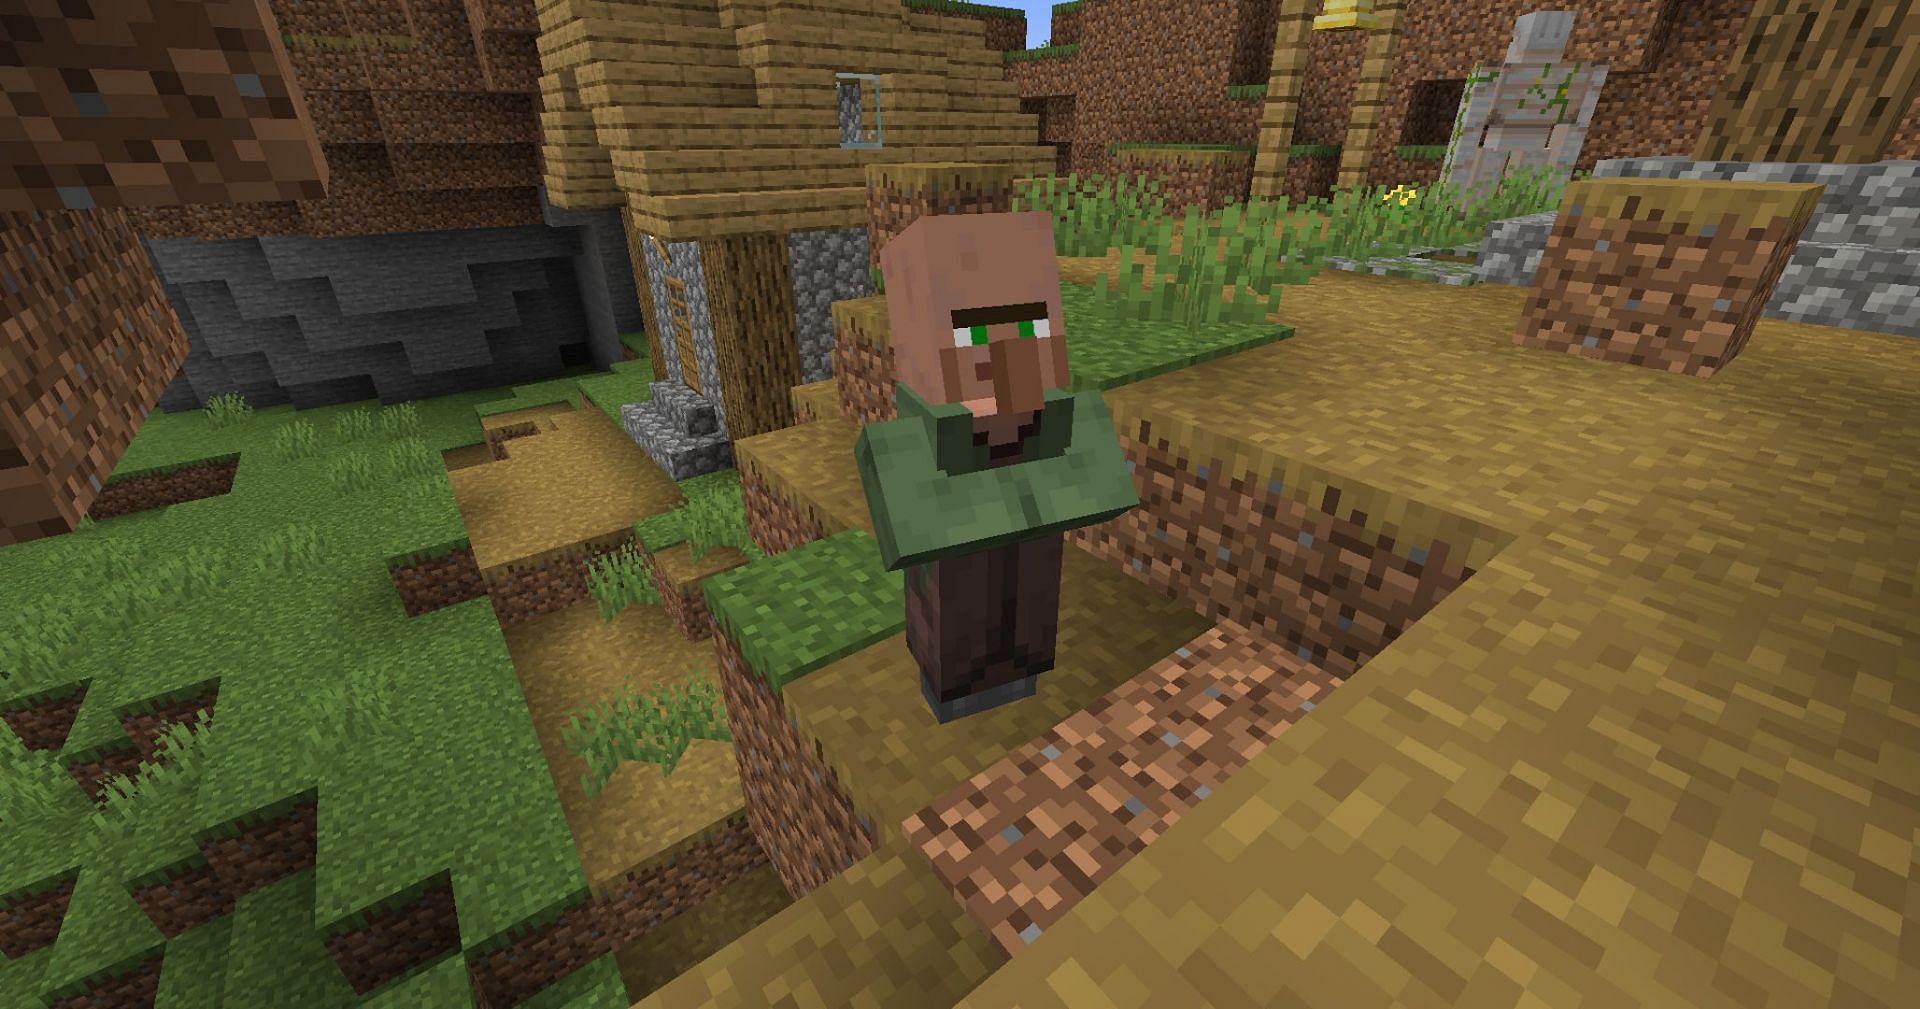 Nitwits are often on their own due to being up later and sleeping longer (Image via Mojang)